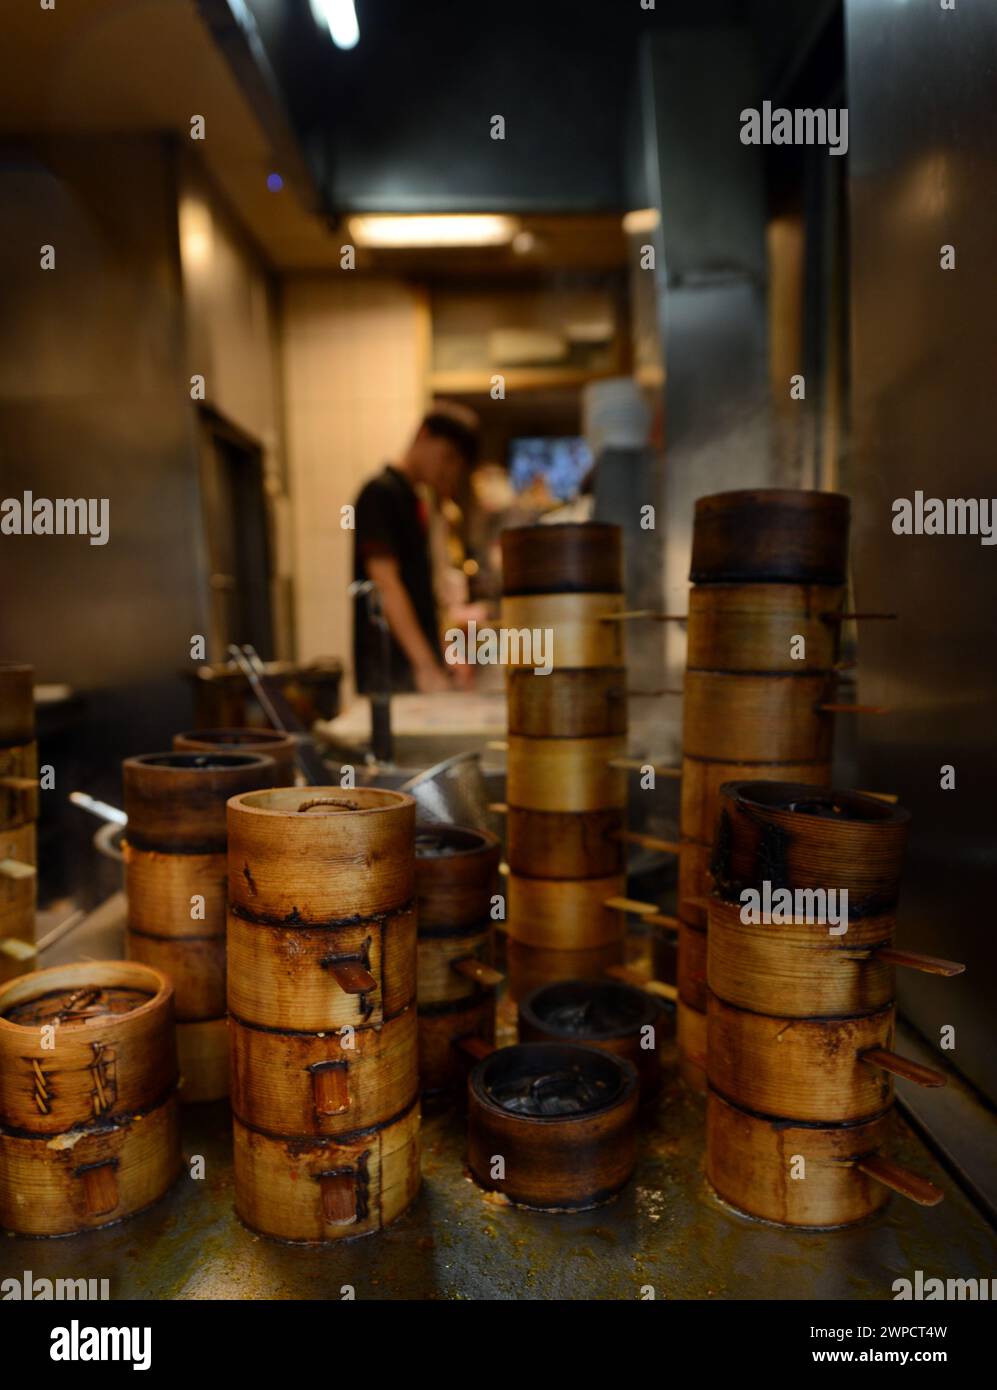 Steamed dumplings in traditional bamboo steaming pots at the Yongkang Beef Noodles restaurant on Jinshan S Rd, Taipei, Taiwan. Stock Photo